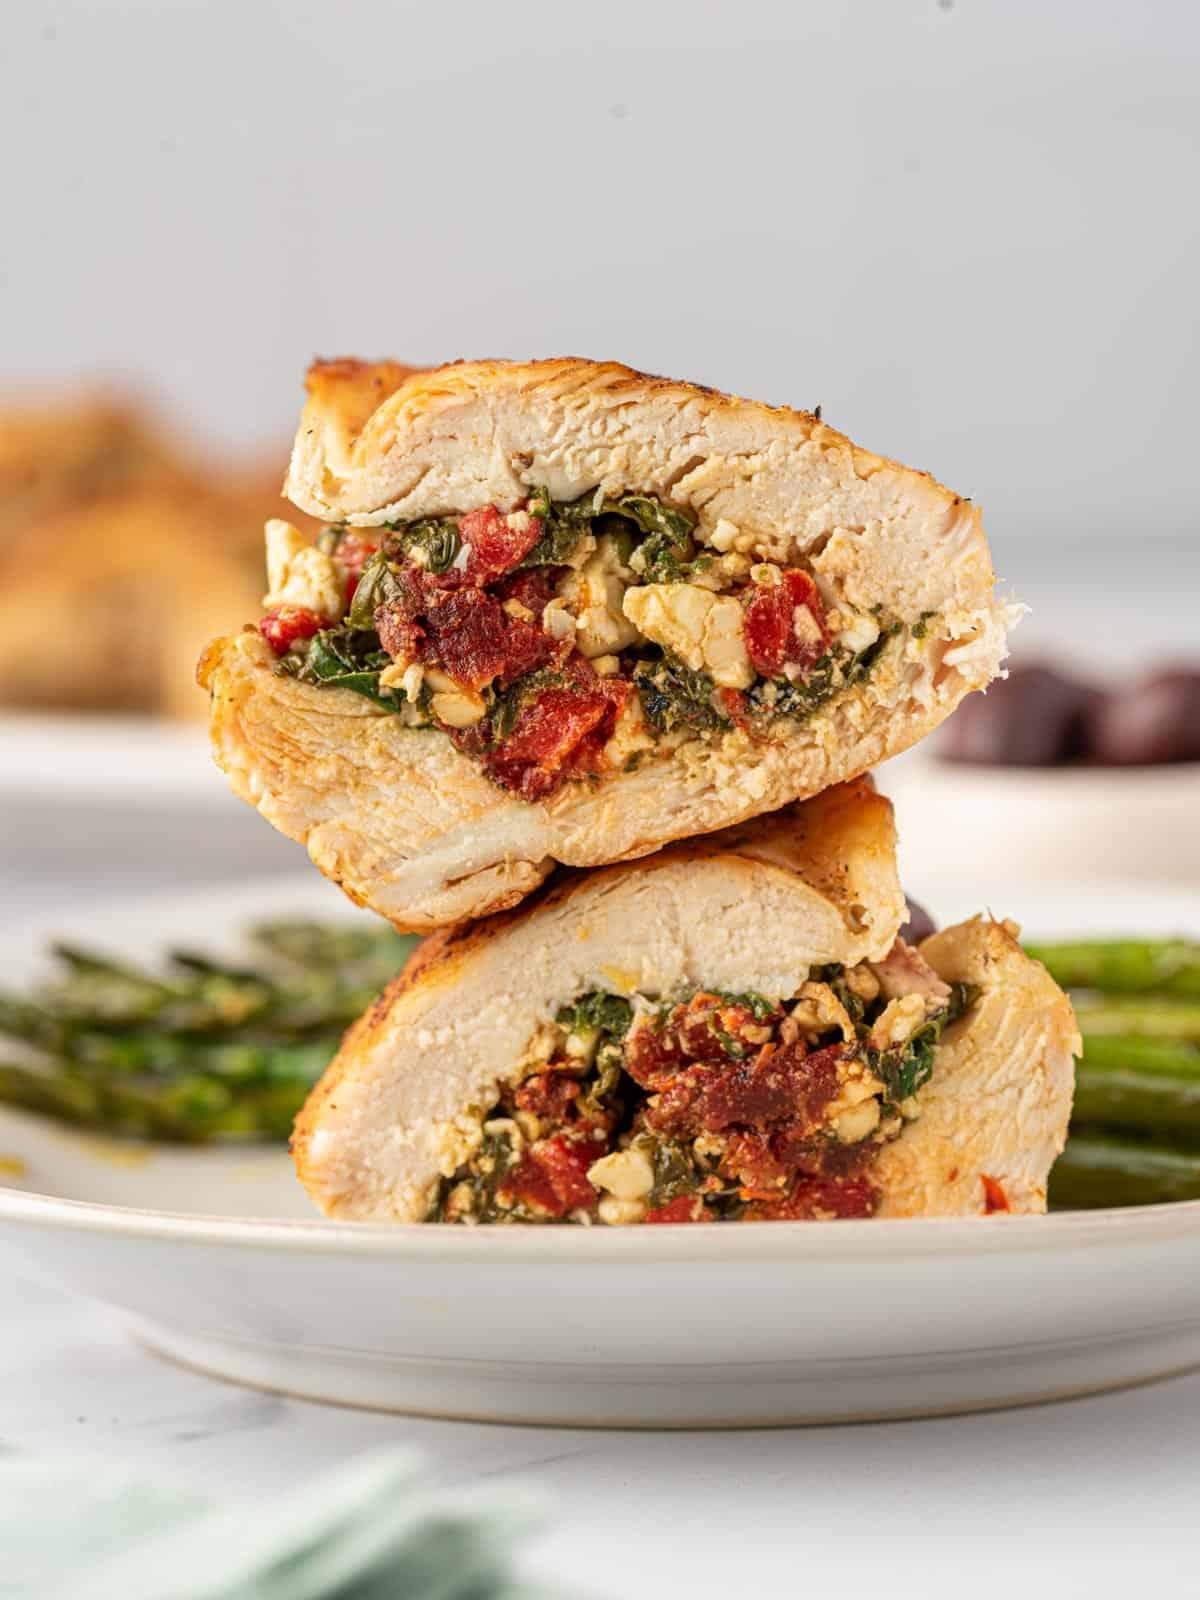 Spice up Your Dinner Time with this Delicious Mediterranean Stuffed Chicken Recipe